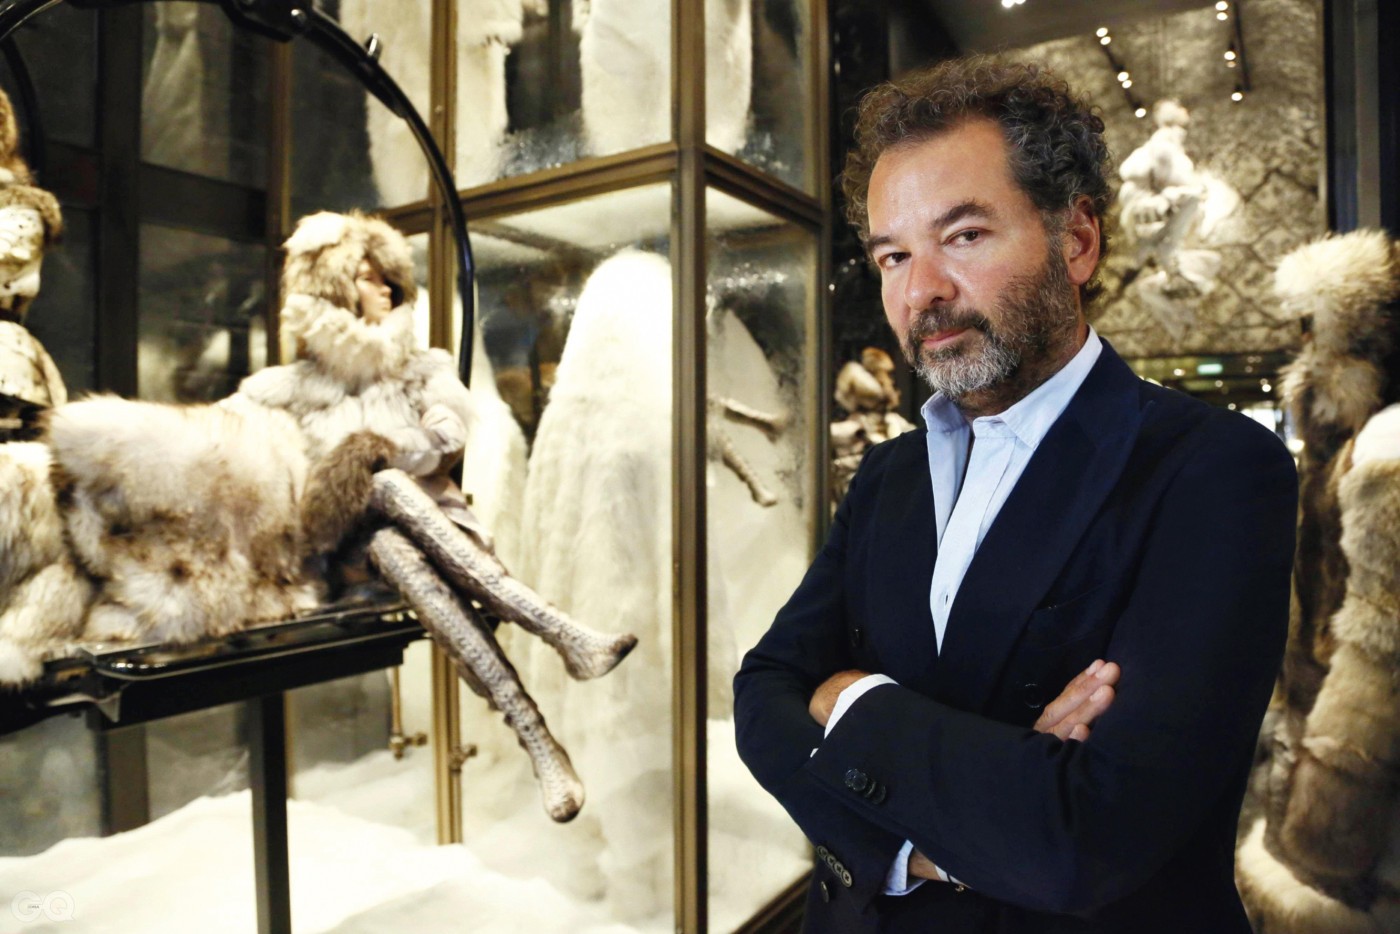 REMO RUFFINI, CHAIRMAN AND CREATIVE DIRECTOR OF MONCLER AS HE POSES AT MONCLER'S BOUTIQUE RUE DU FAUBOURG SAINT HONORE IN PARIS, FRANCE-30/08/2013., JDD_1222.40 %_ 00664009  _%